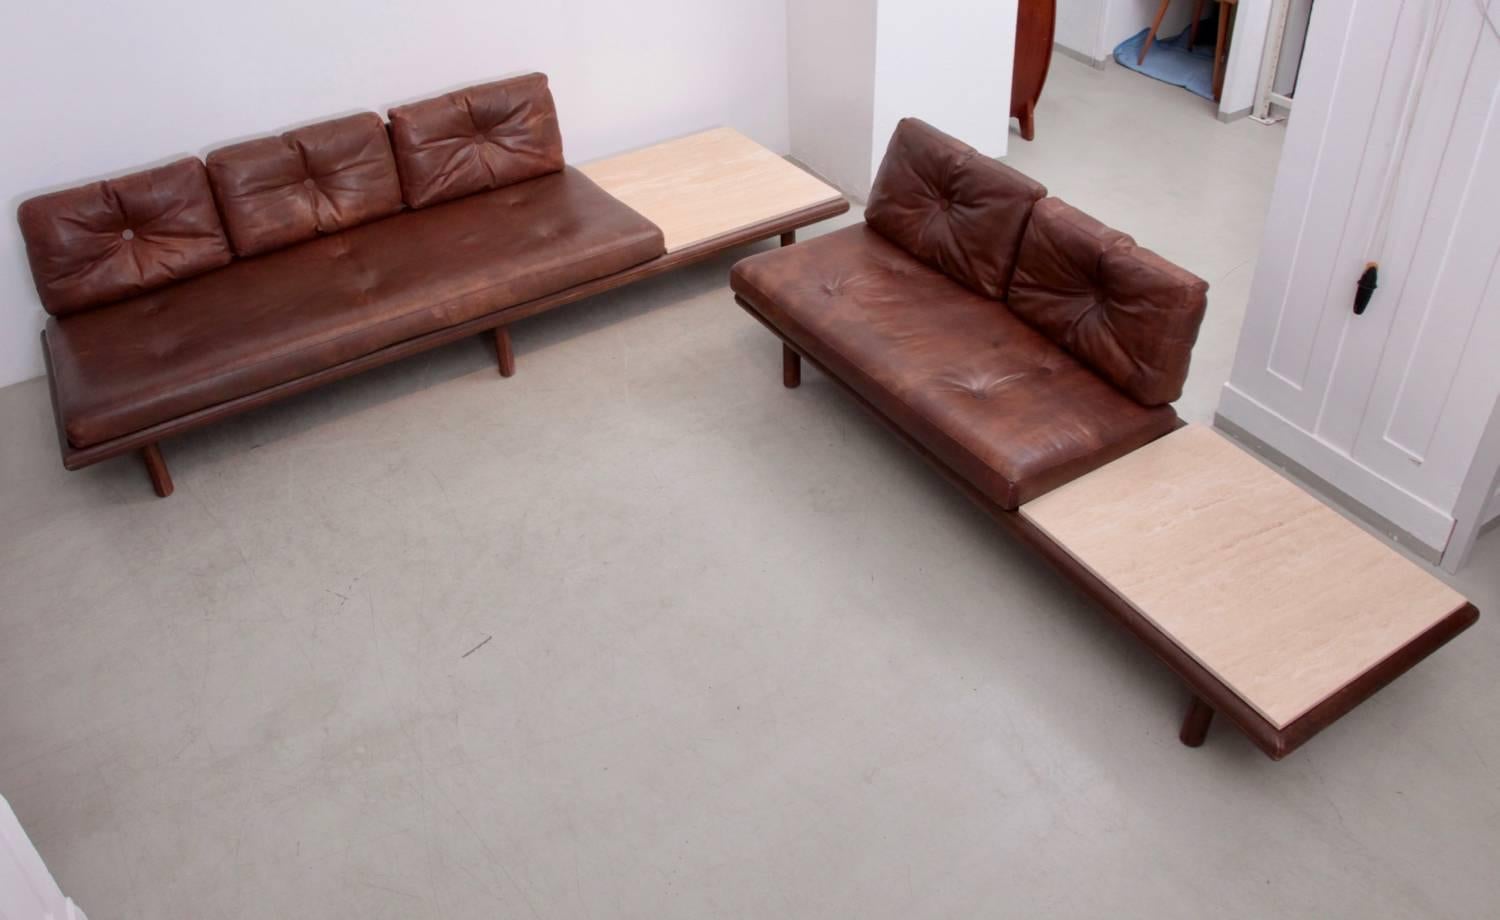 Original leather and travertine sofa set #6603 by High-End Manufacturer Kill International. All legs are also leather covered.
Fully functional vintage condition. The settee including travertine side table is: 223cm long / 88